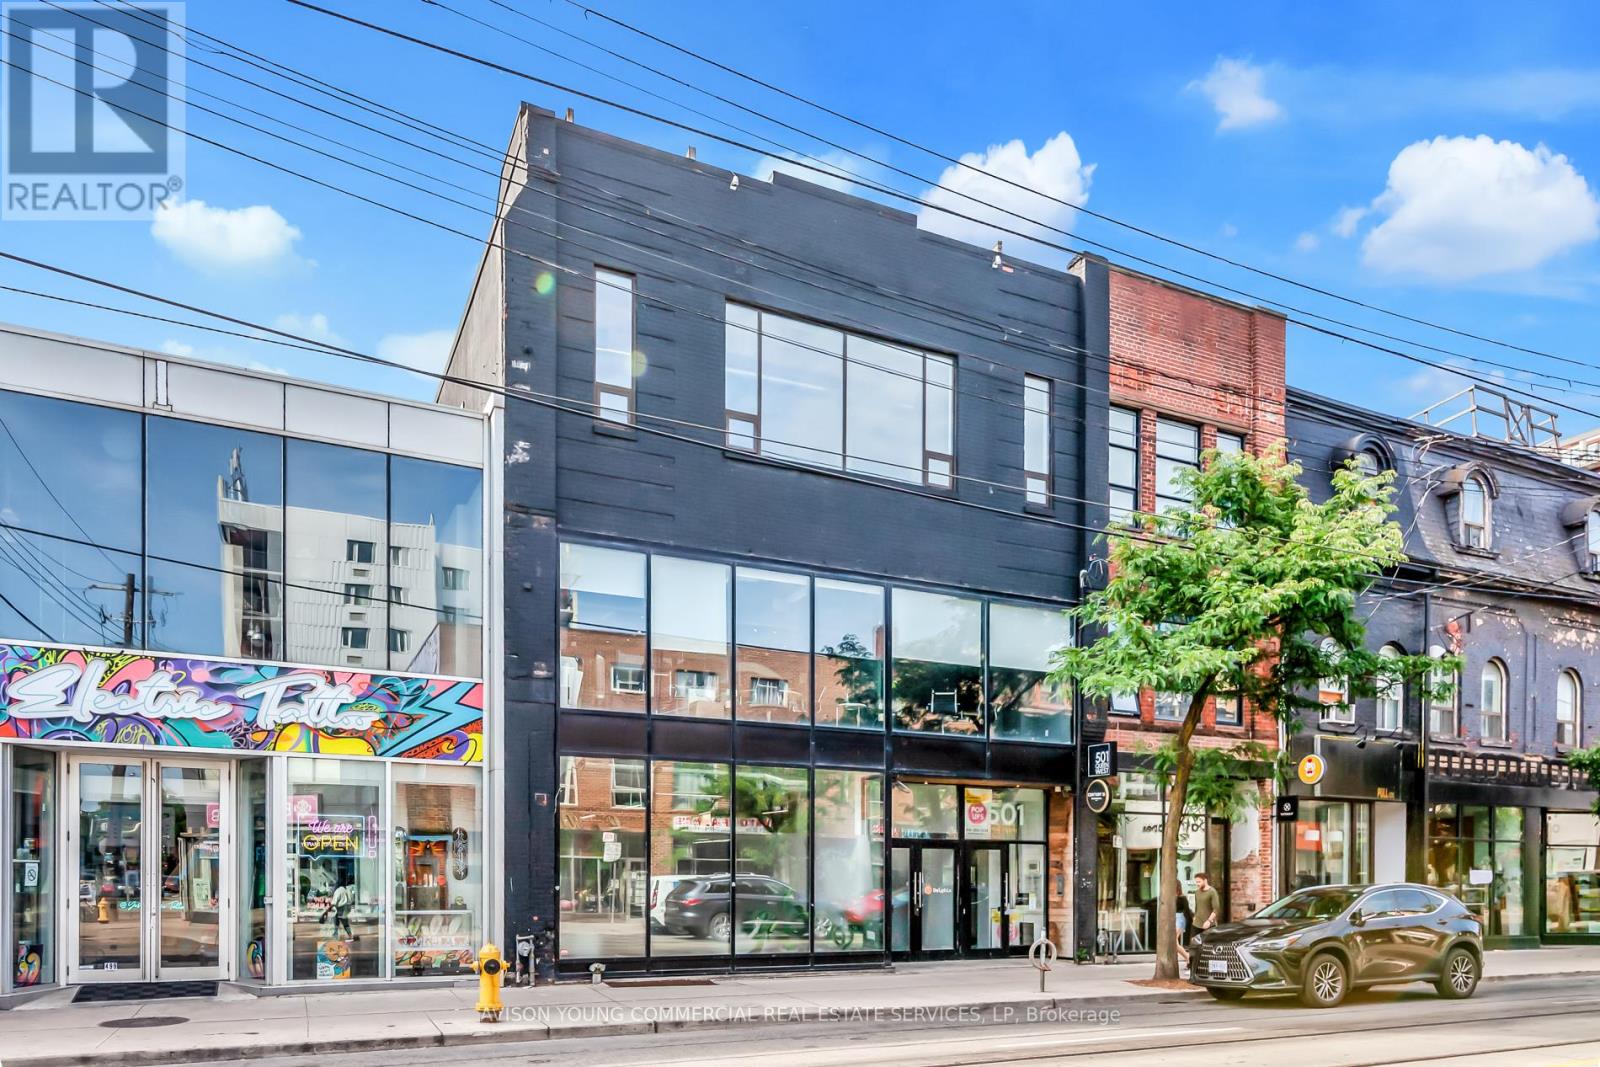 For lease: #300 -501 QUEEN ST W, Toronto, Ontario M5V2B4